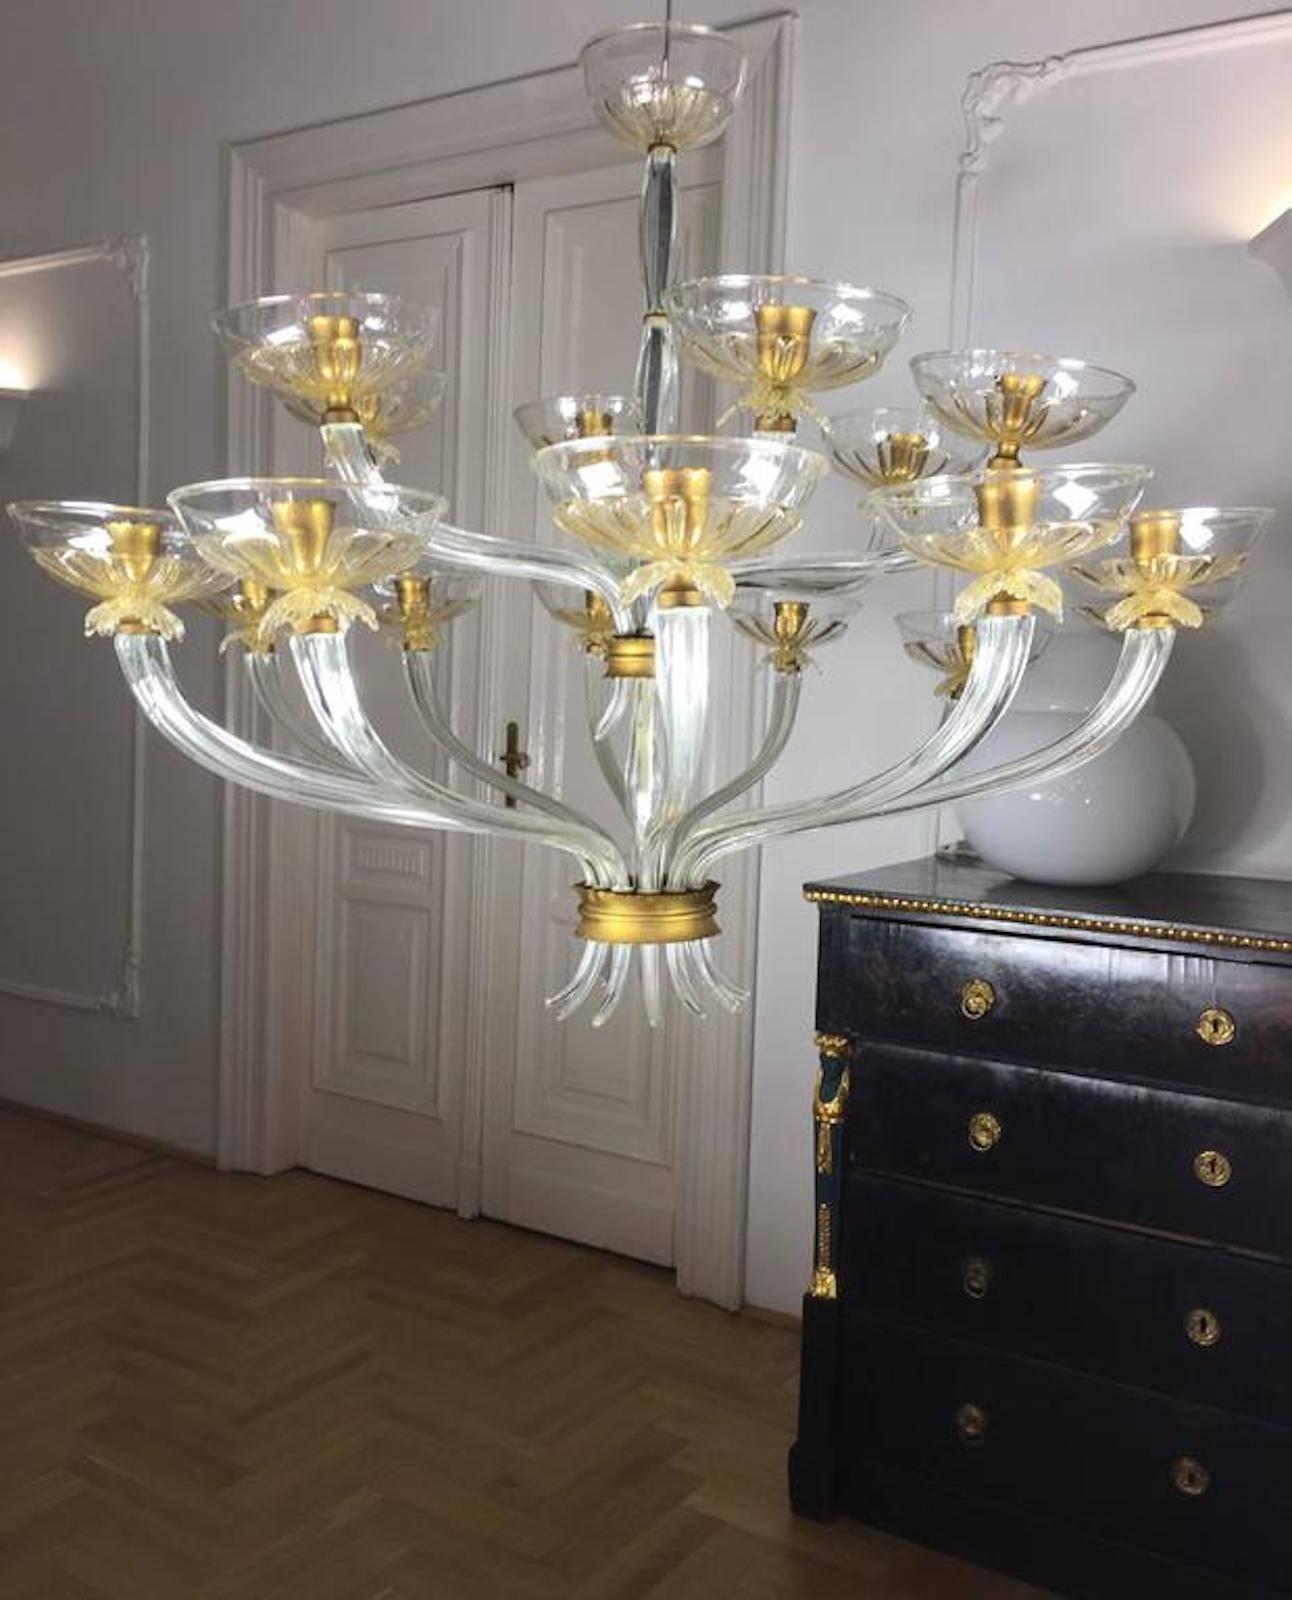 Luxurious chandelier of the renowned Barovier & Toso glassware. It was made with 18 arms, and was refined with elegant gold-plated cups. From the private collection of Baron Von Plant.